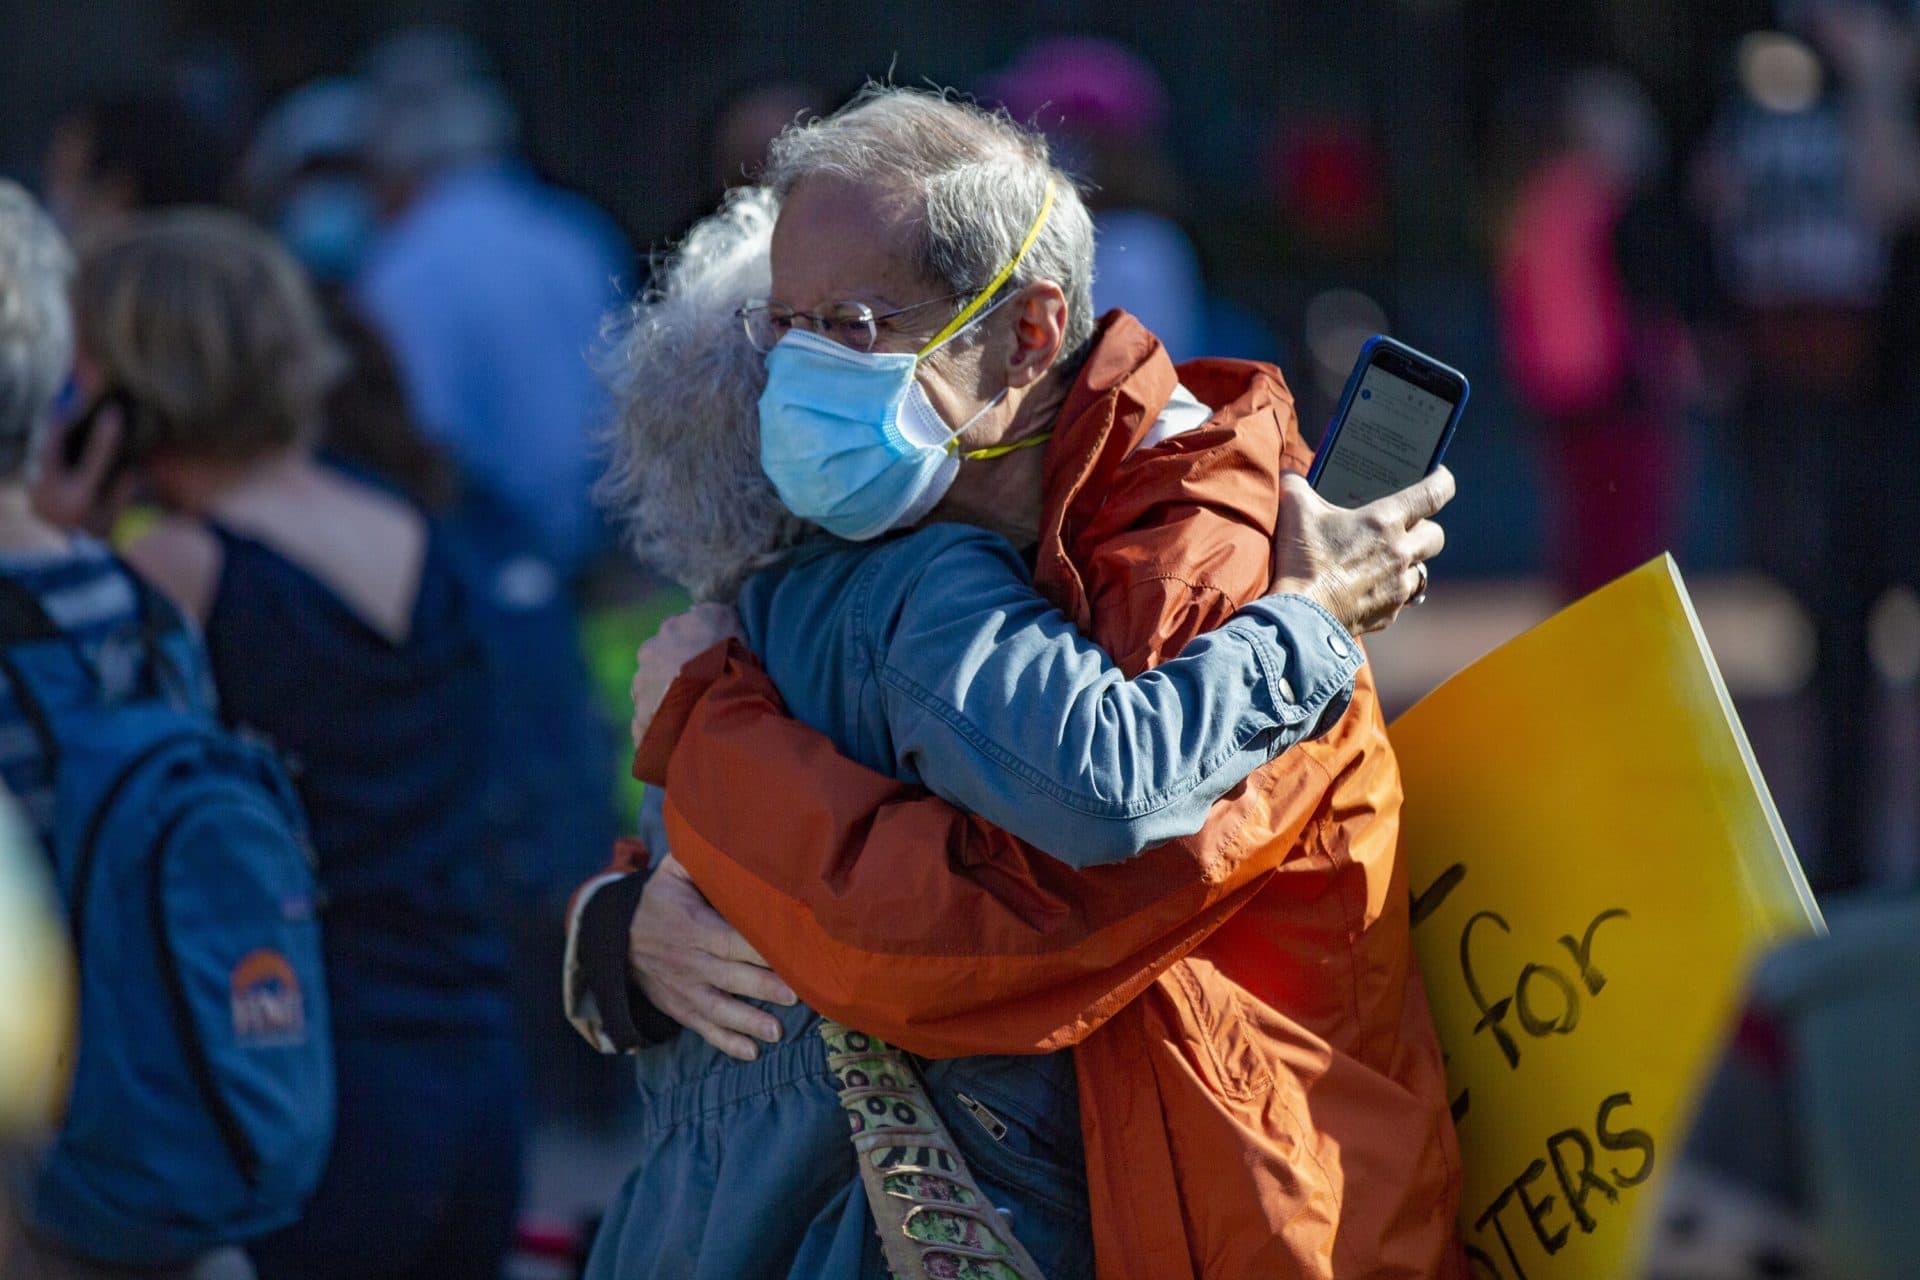 Sherry Flashman and Lee Cranberg of Brookline embrace shortly after the announcement Joe Biden has become the president-elect at the Sunrise Movement and labor groups rally at Copley Square. (Jesse Costa/WBUR)